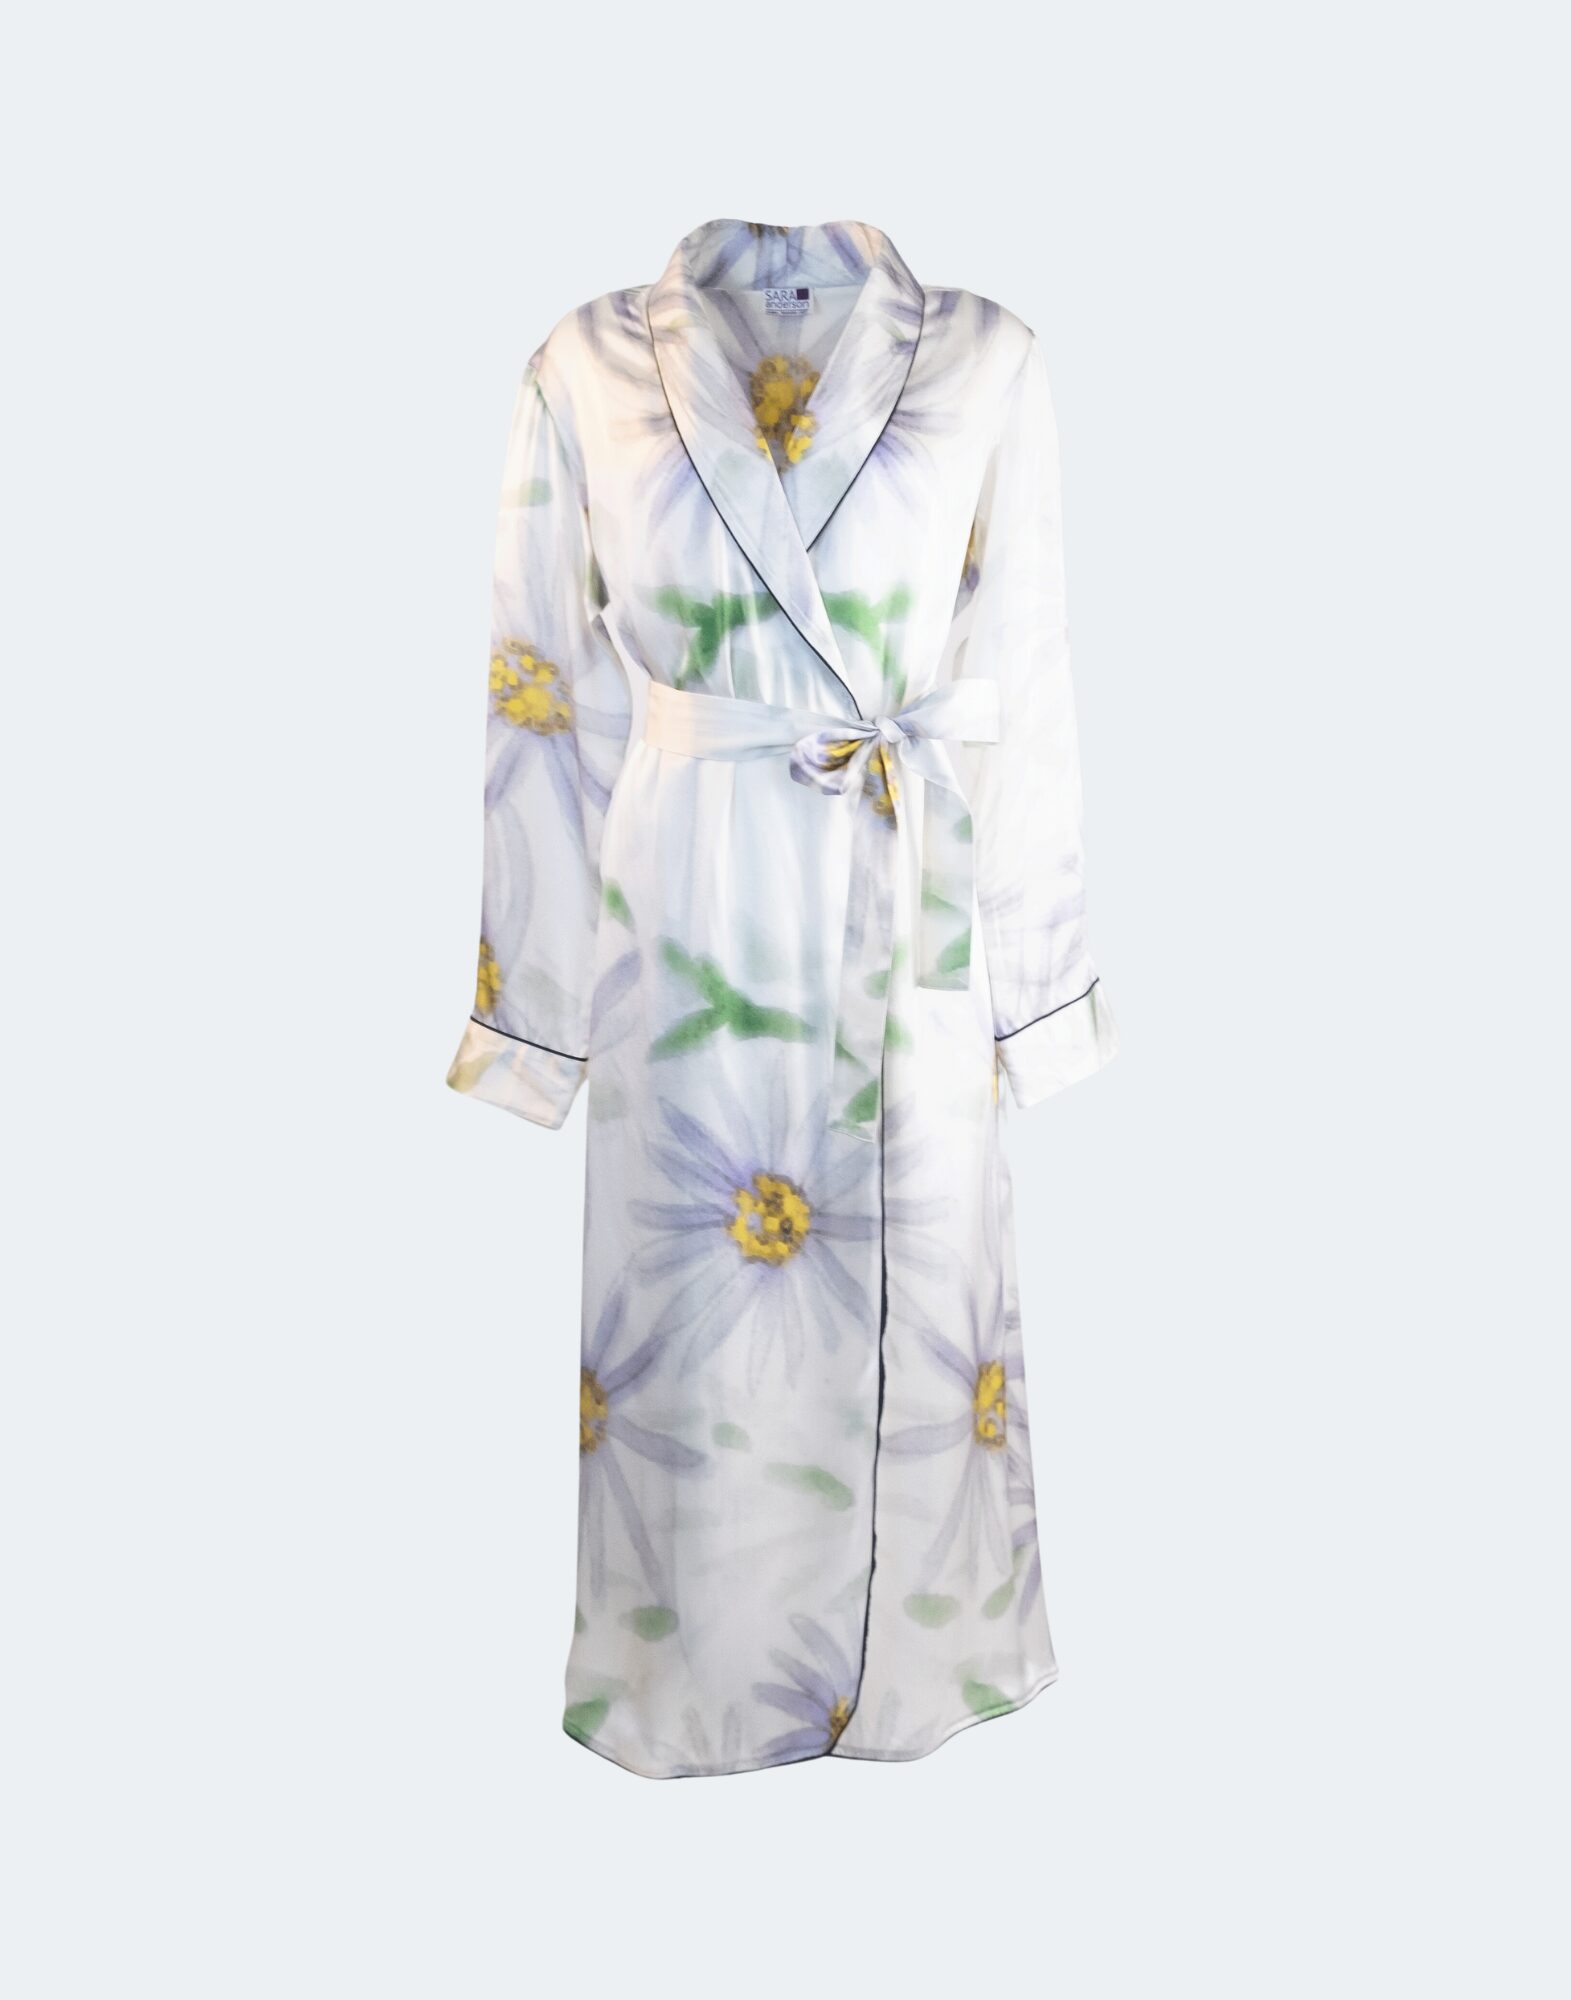 pale robe with daisy print